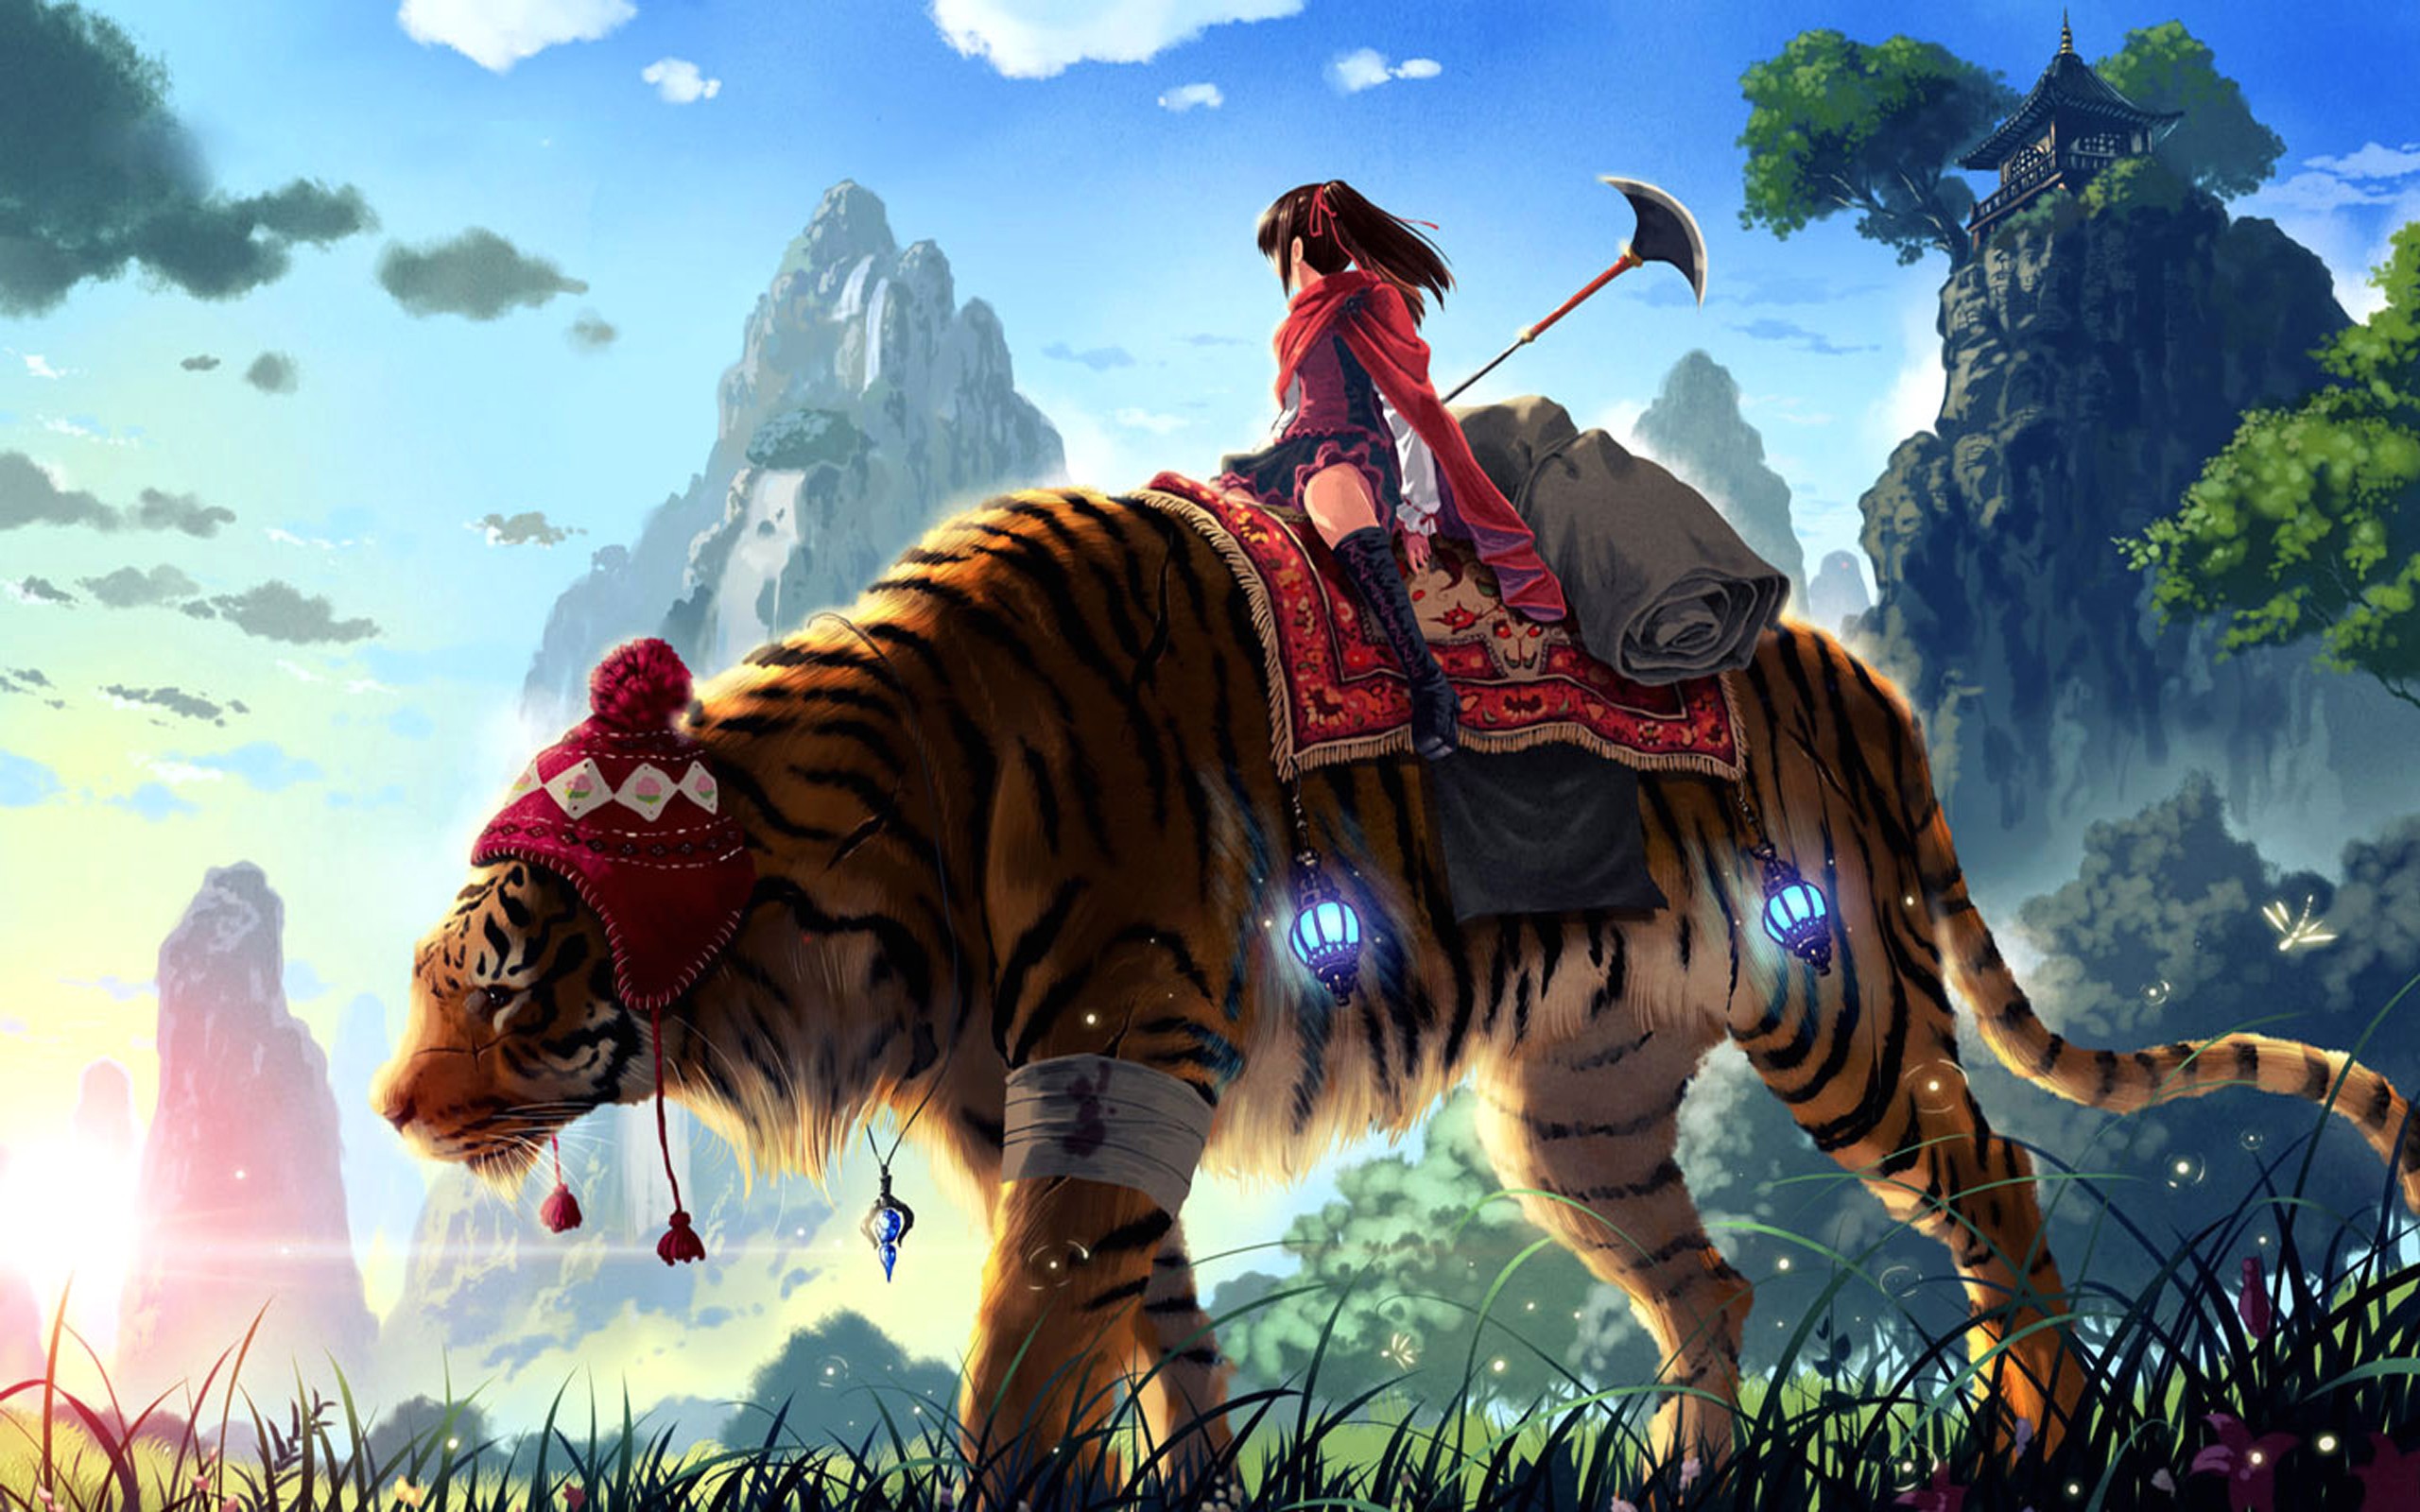 General 2560x1600 tiger anime girls fantasy art anime creature animals big cats nature mountains weapon sunset sunset glow fireflies Sunset Skyline Sunset Shimmer clouds grass winter clothing wounds injured bandages flowers trees field Sun night lanterns